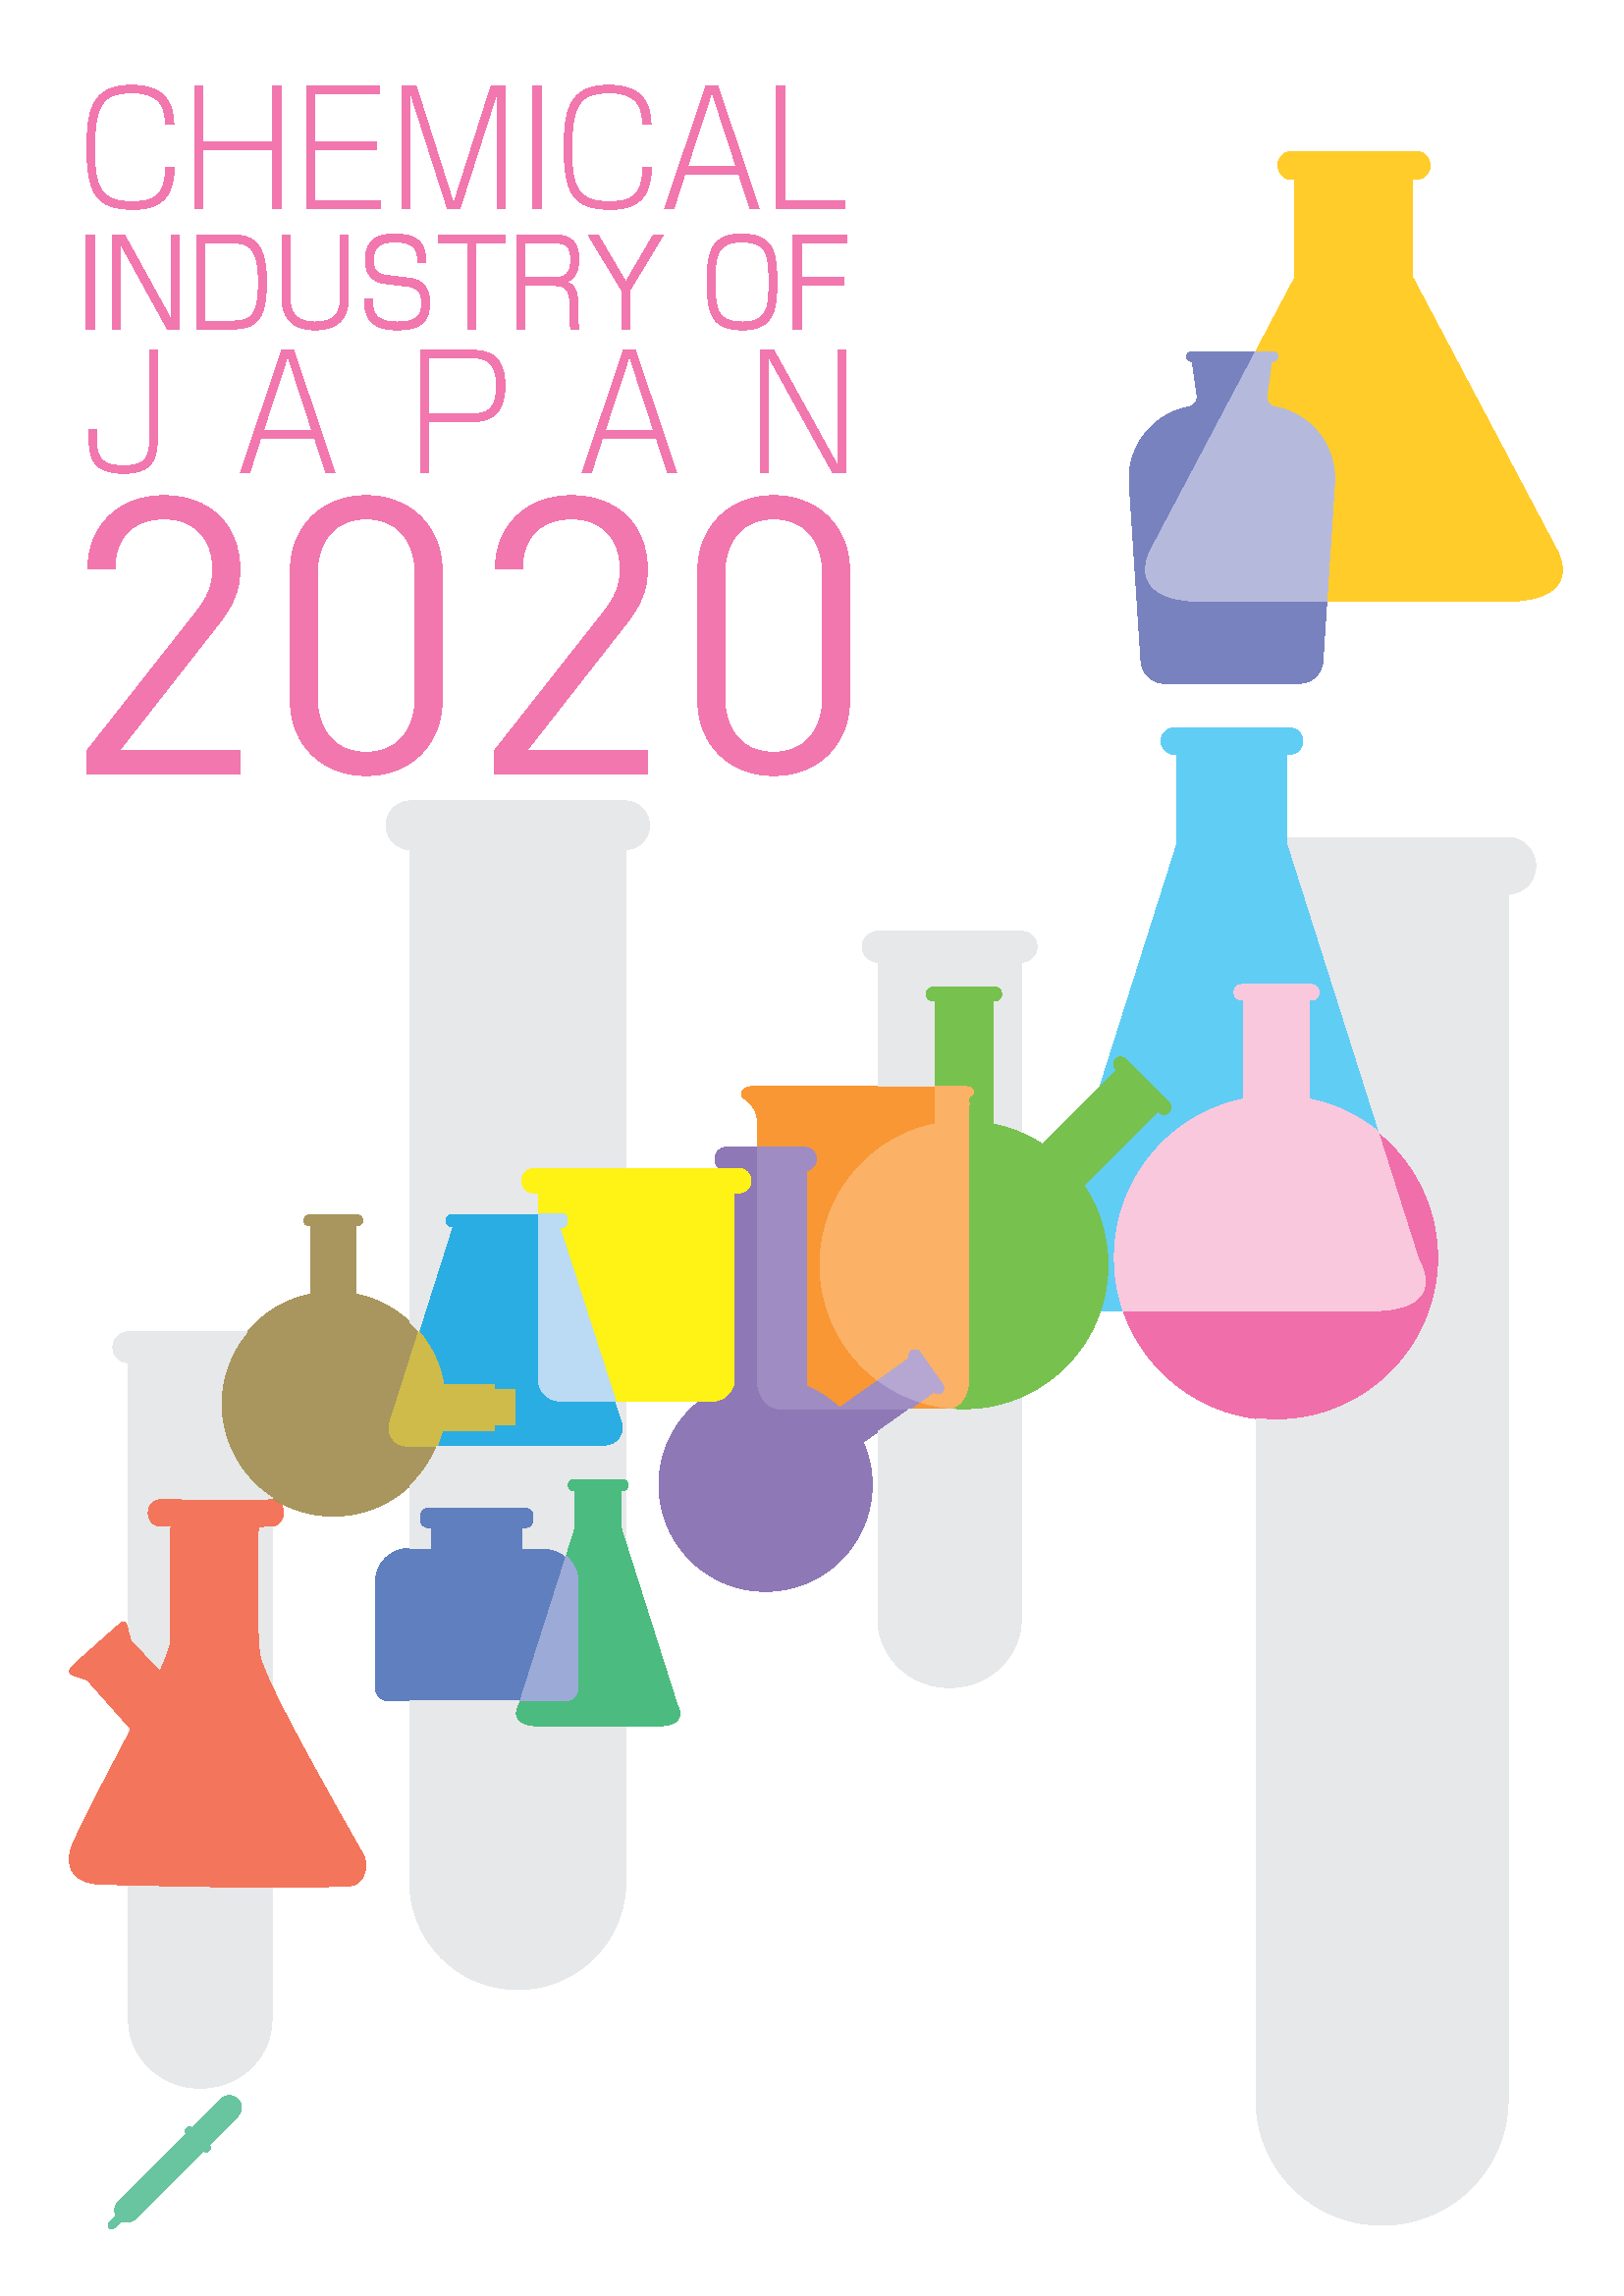 2020 CHEMICAL INDUSTRY OF JAPAN IN GRAPHS